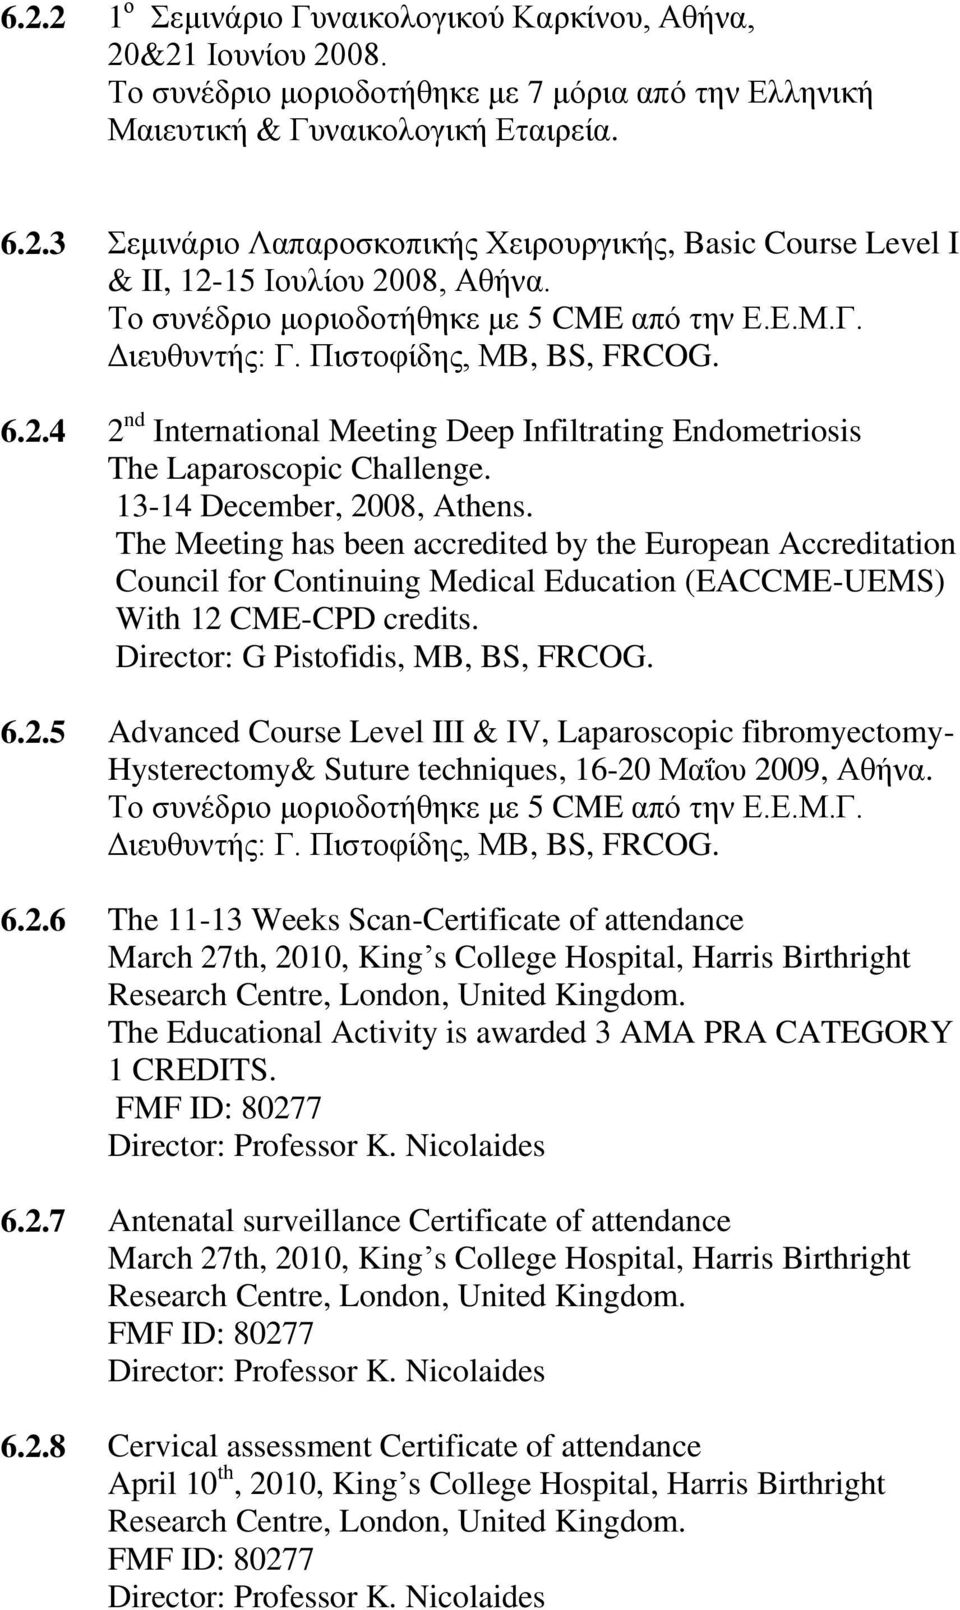 13-14 December, 2008, Athens. The Meeting has been accredited by the European Accreditation Council for Continuing Medical Education (EACCME-UEMS) With 12 CME-CPD credits.